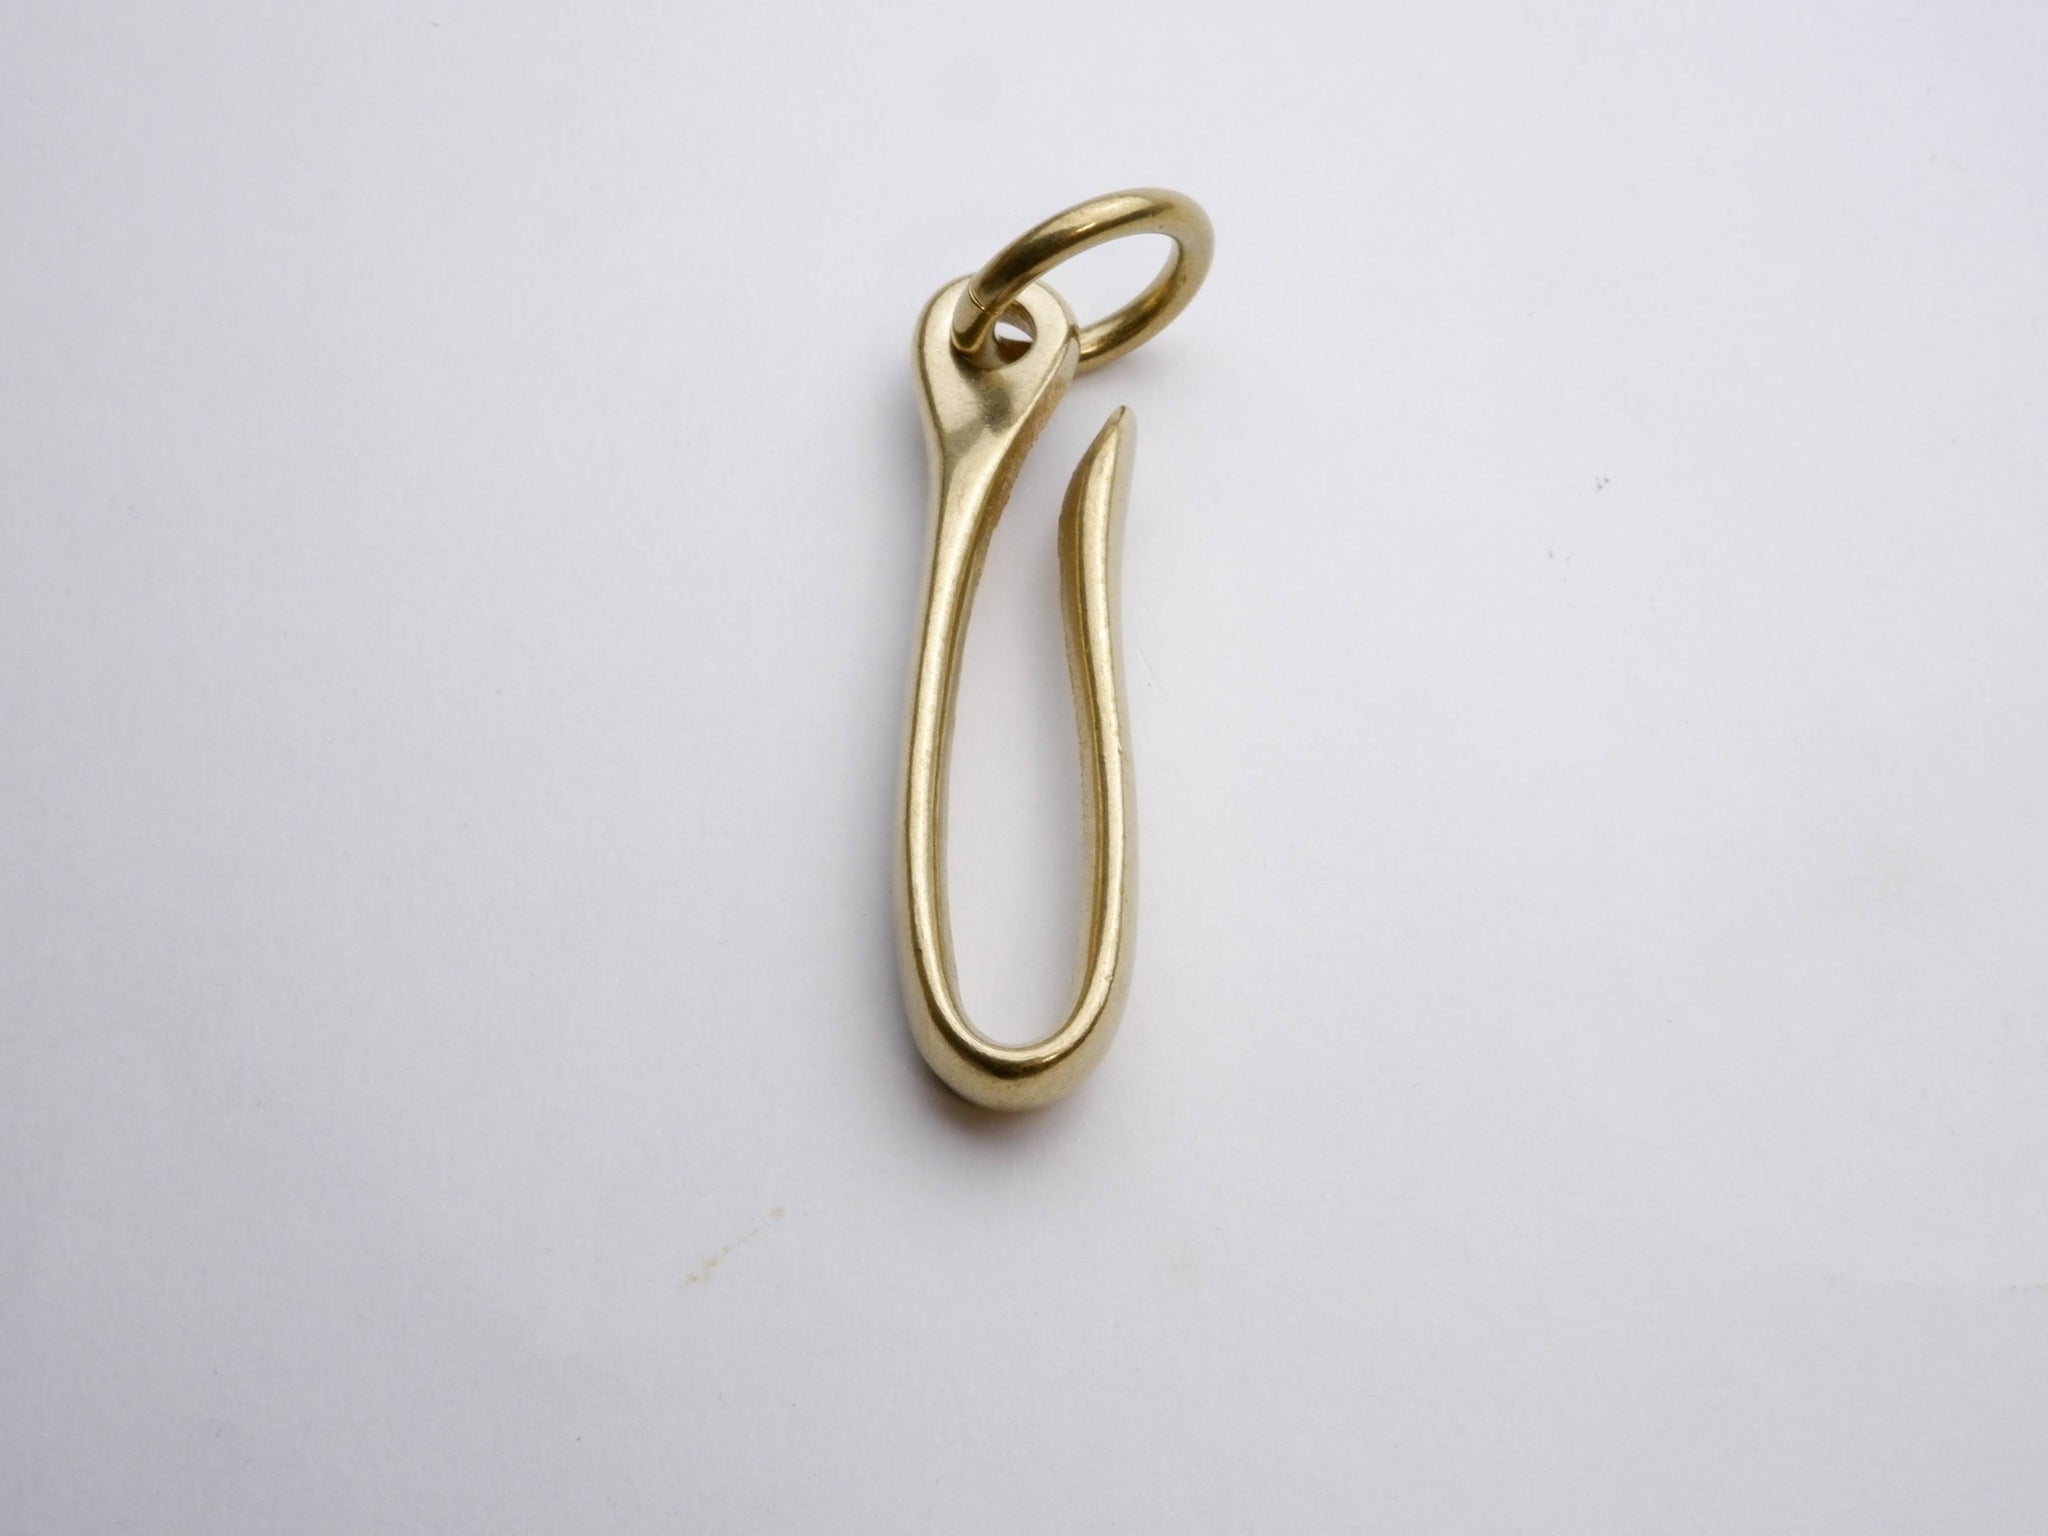 Kyoshin Elle - Japanese Brass Fish Hook Key Chain / Jump Ring and Hook –  Crafts By Littlebear